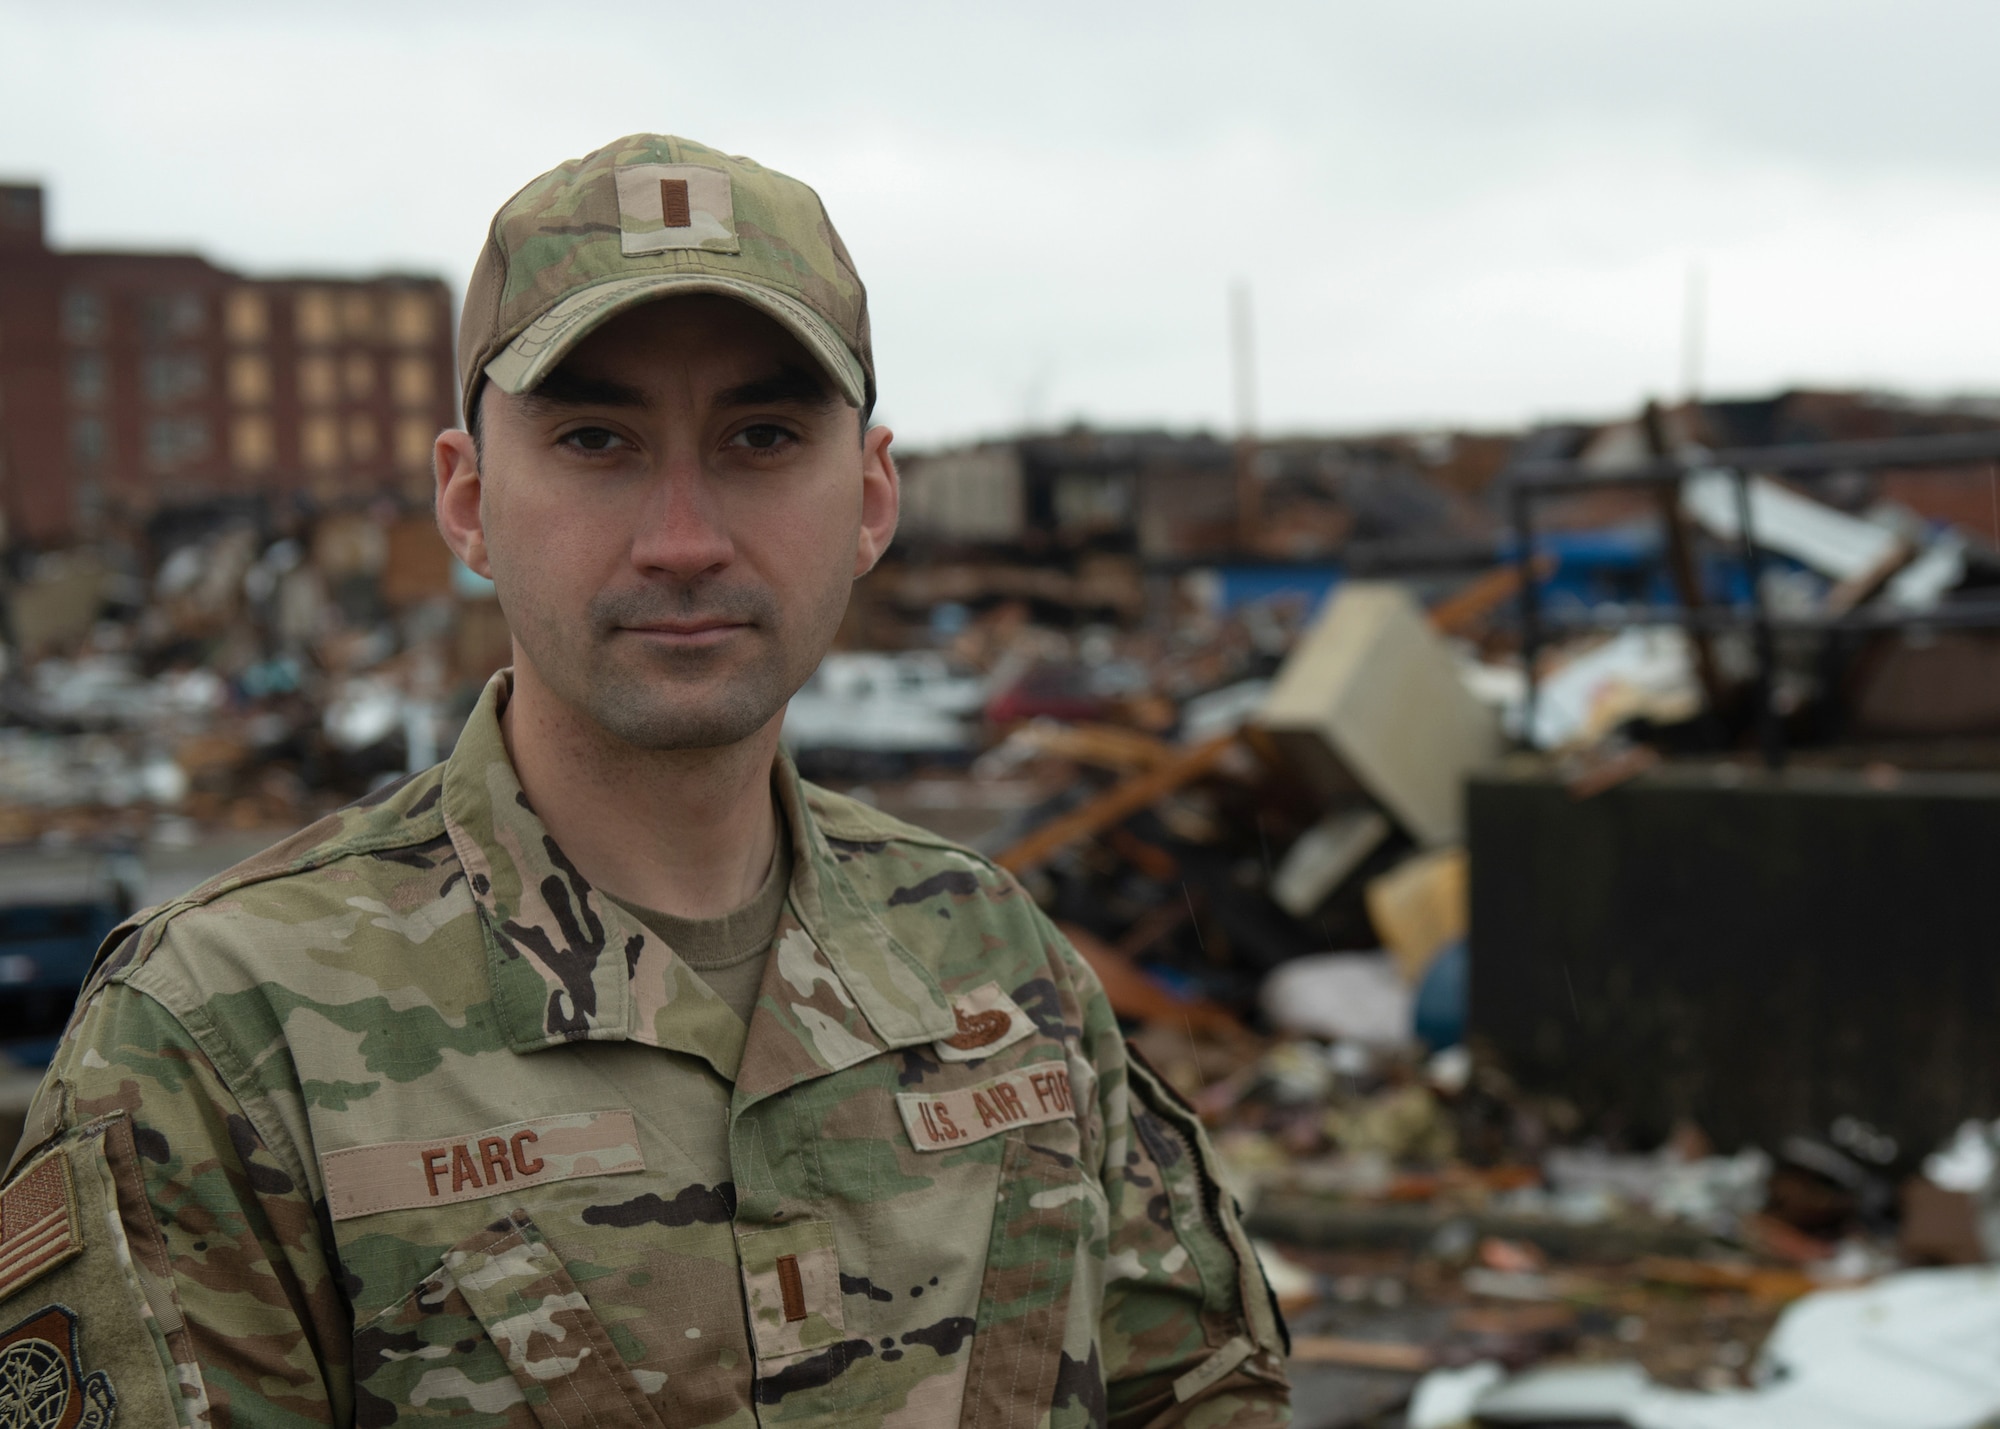 2nd Lt. David Farc, operations officer for the Kentucky Air National Guard’s 123rd Security Forces Squadron, was one of 17 defenders who deployed from Louisville, Ky., to Mayfield, Ky., Dec. 12, 2021, following a Category 5 tornado that leveled much of the town. (U.S. Air National Guard photo by Staff Sgt. Clayton Wear)